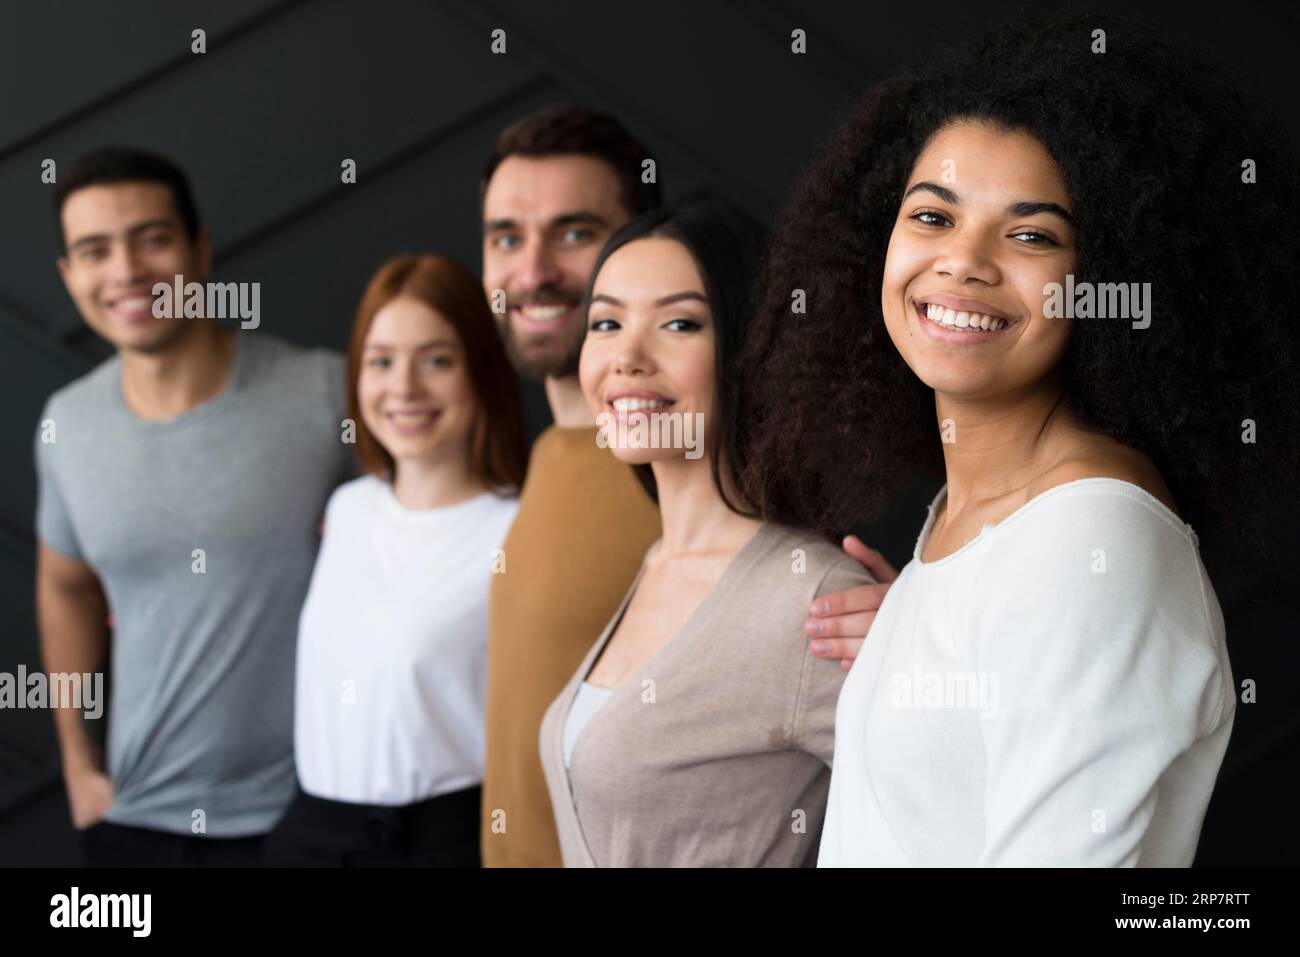 Front view positive young people smiling Stock Photo